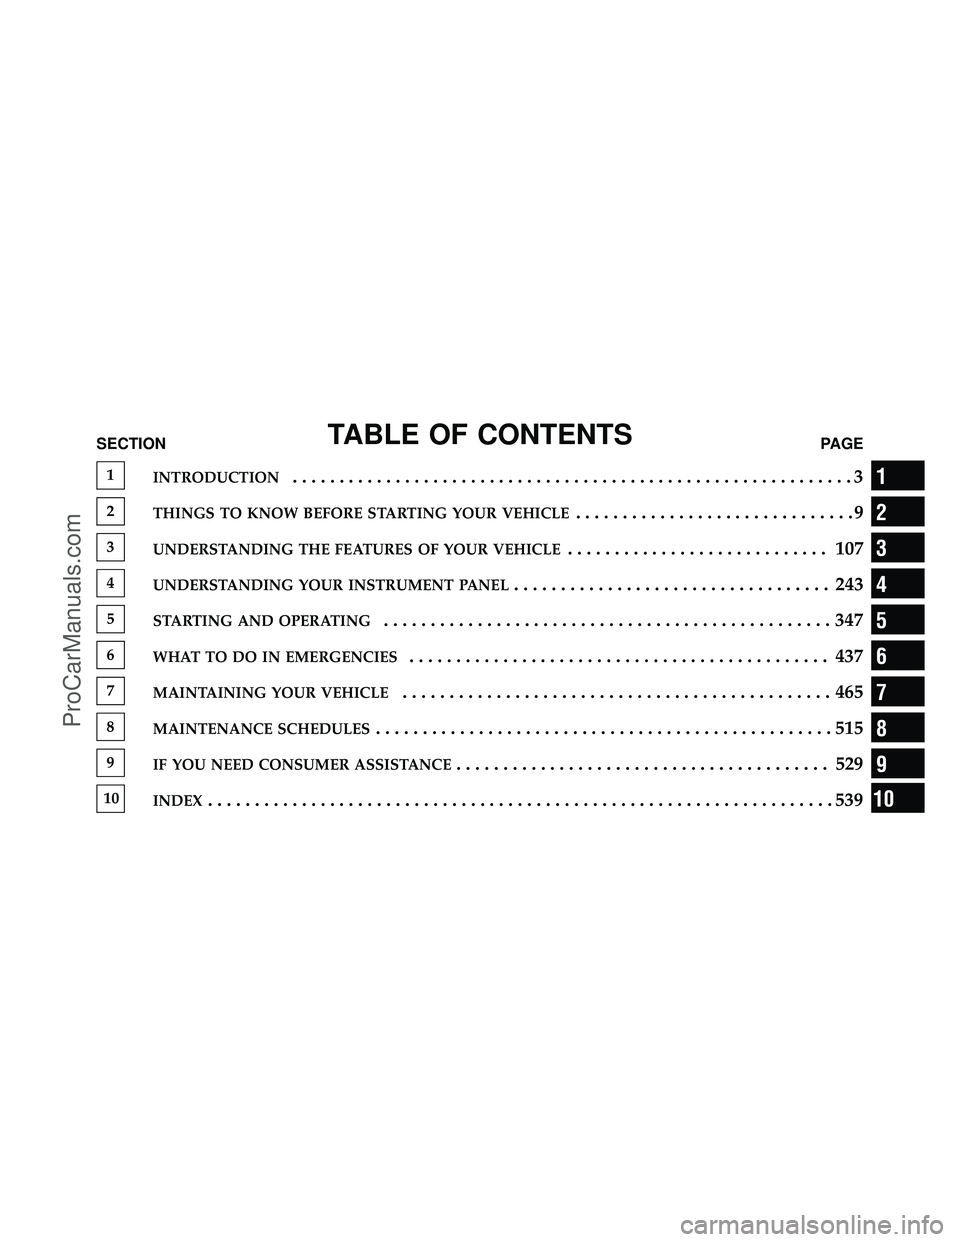 DODGE CARAVAN 2011  Owners Manual TABLE OF CONTENTSSECTIONPAGE
1INTRODUCTION............................................................3
2THINGS TO KNOW BEFORE STARTING YOUR VEHICLE..............................9
3UNDERSTANDING THE F